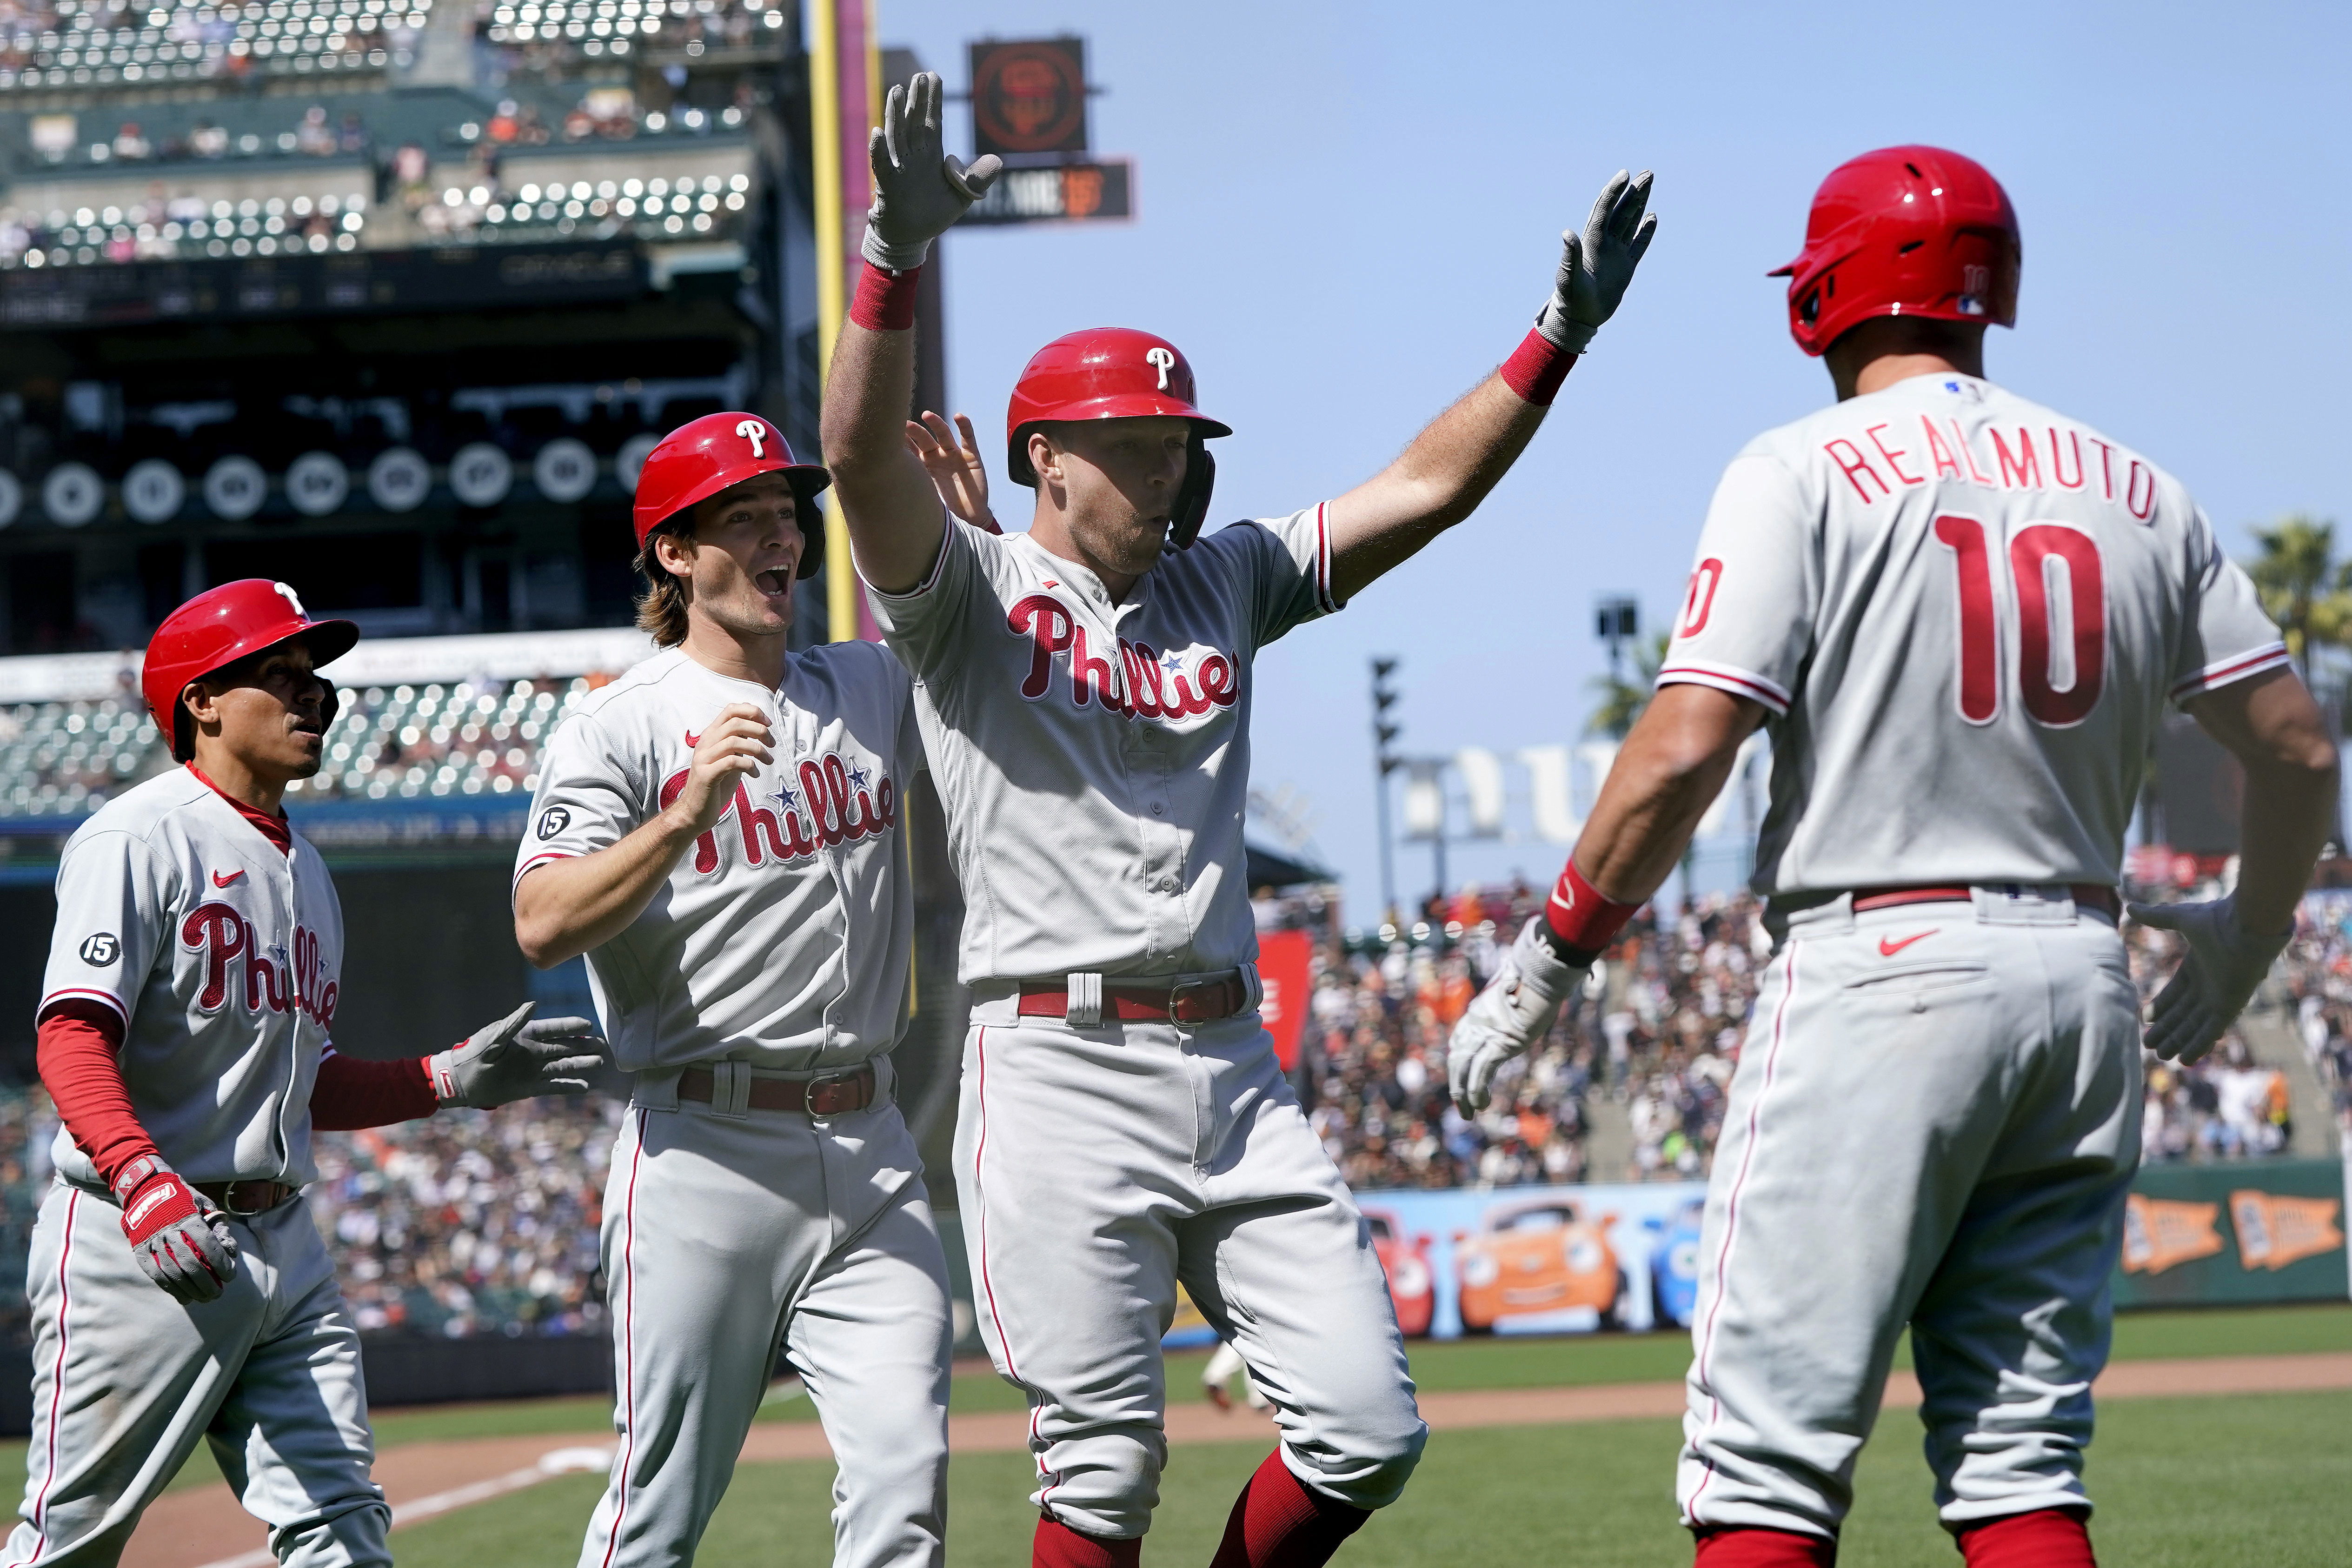 Giants' win streak snapped by 13-6 loss as Phillies break out the